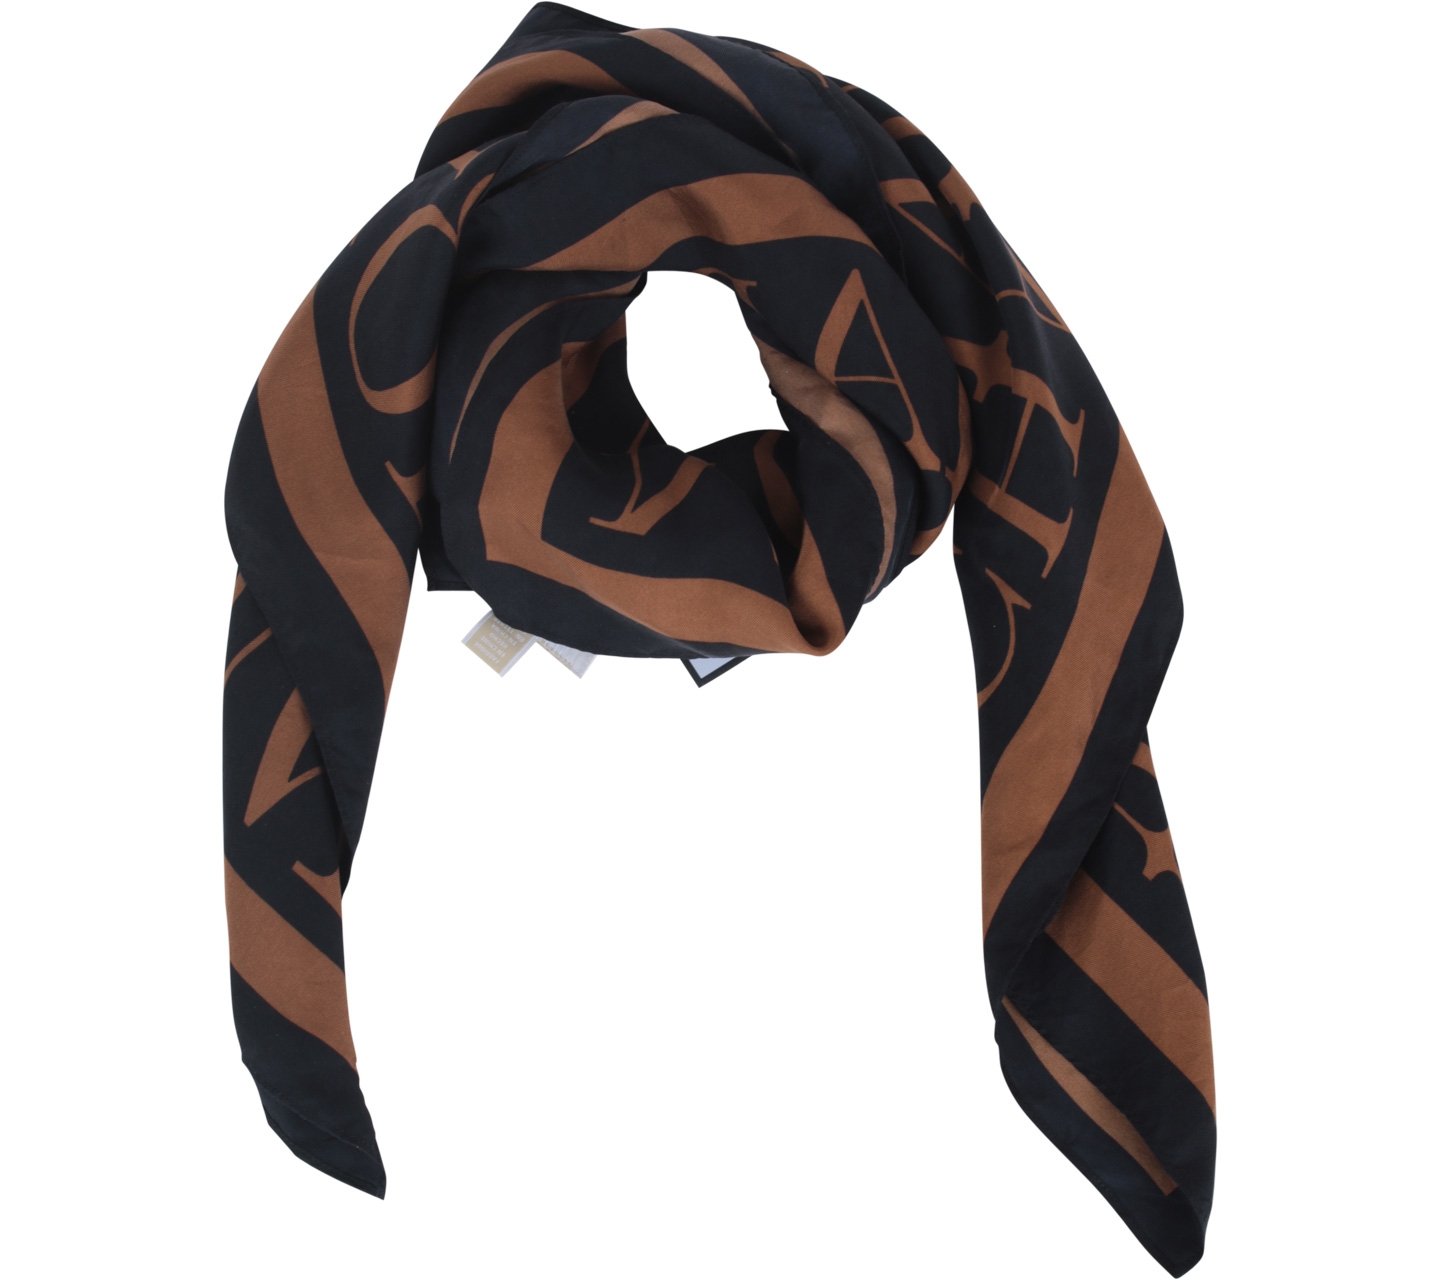 Michael Kors Black And Brown Silk Patterned Scarf